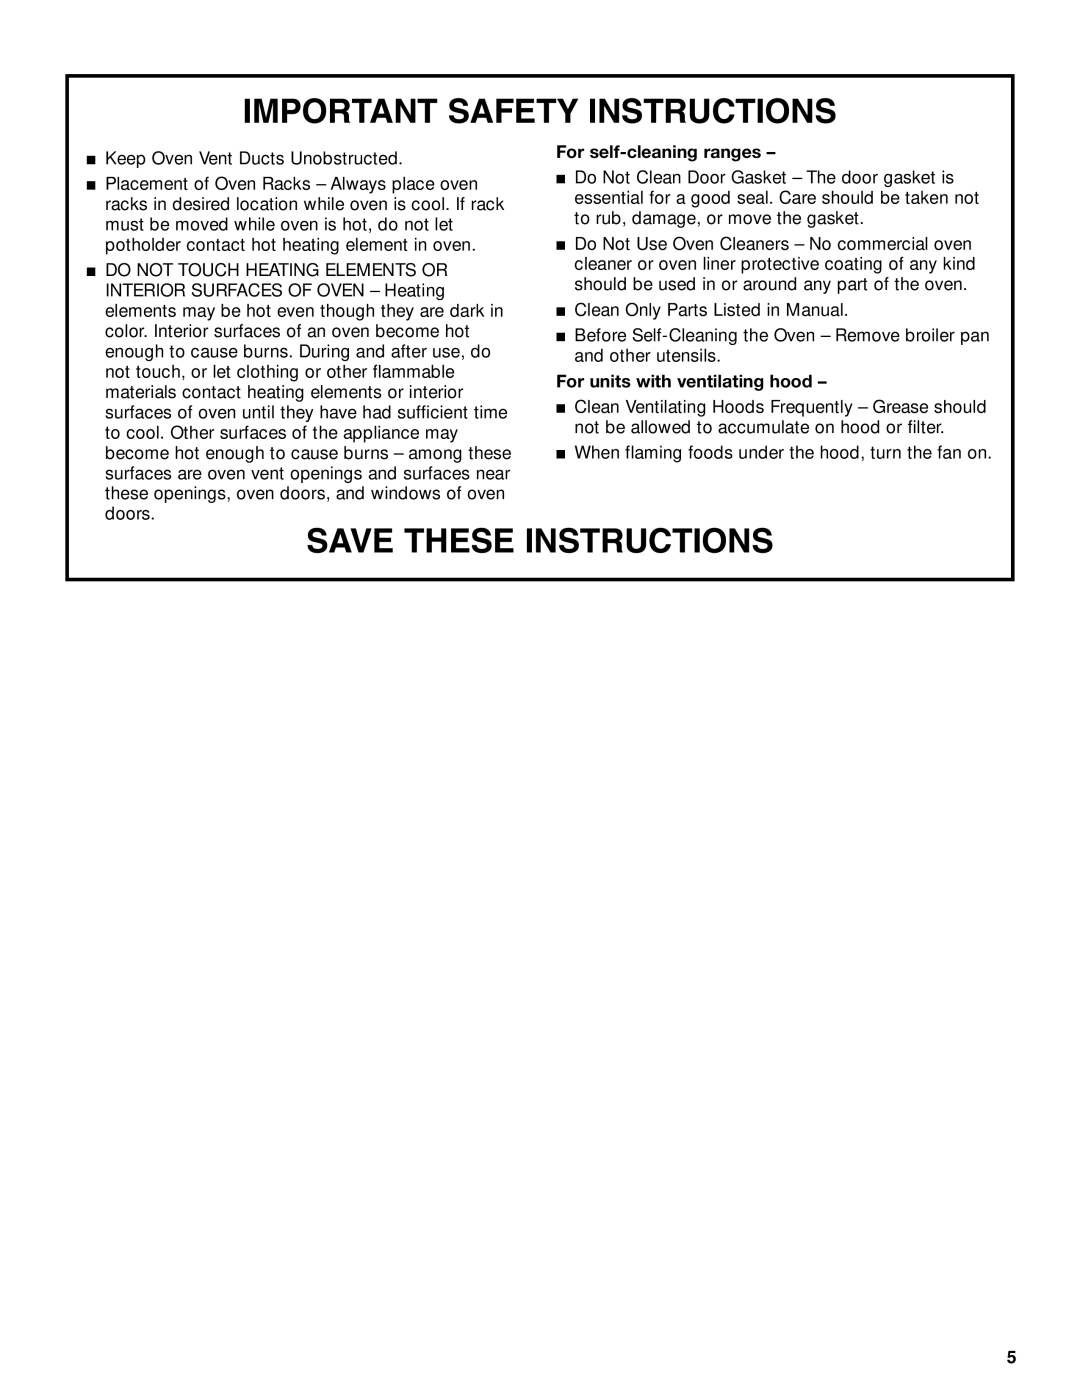 Whirlpool TEP325MW0 manual Important Safety Instructions, Save These Instructions, For self-cleaning ranges 